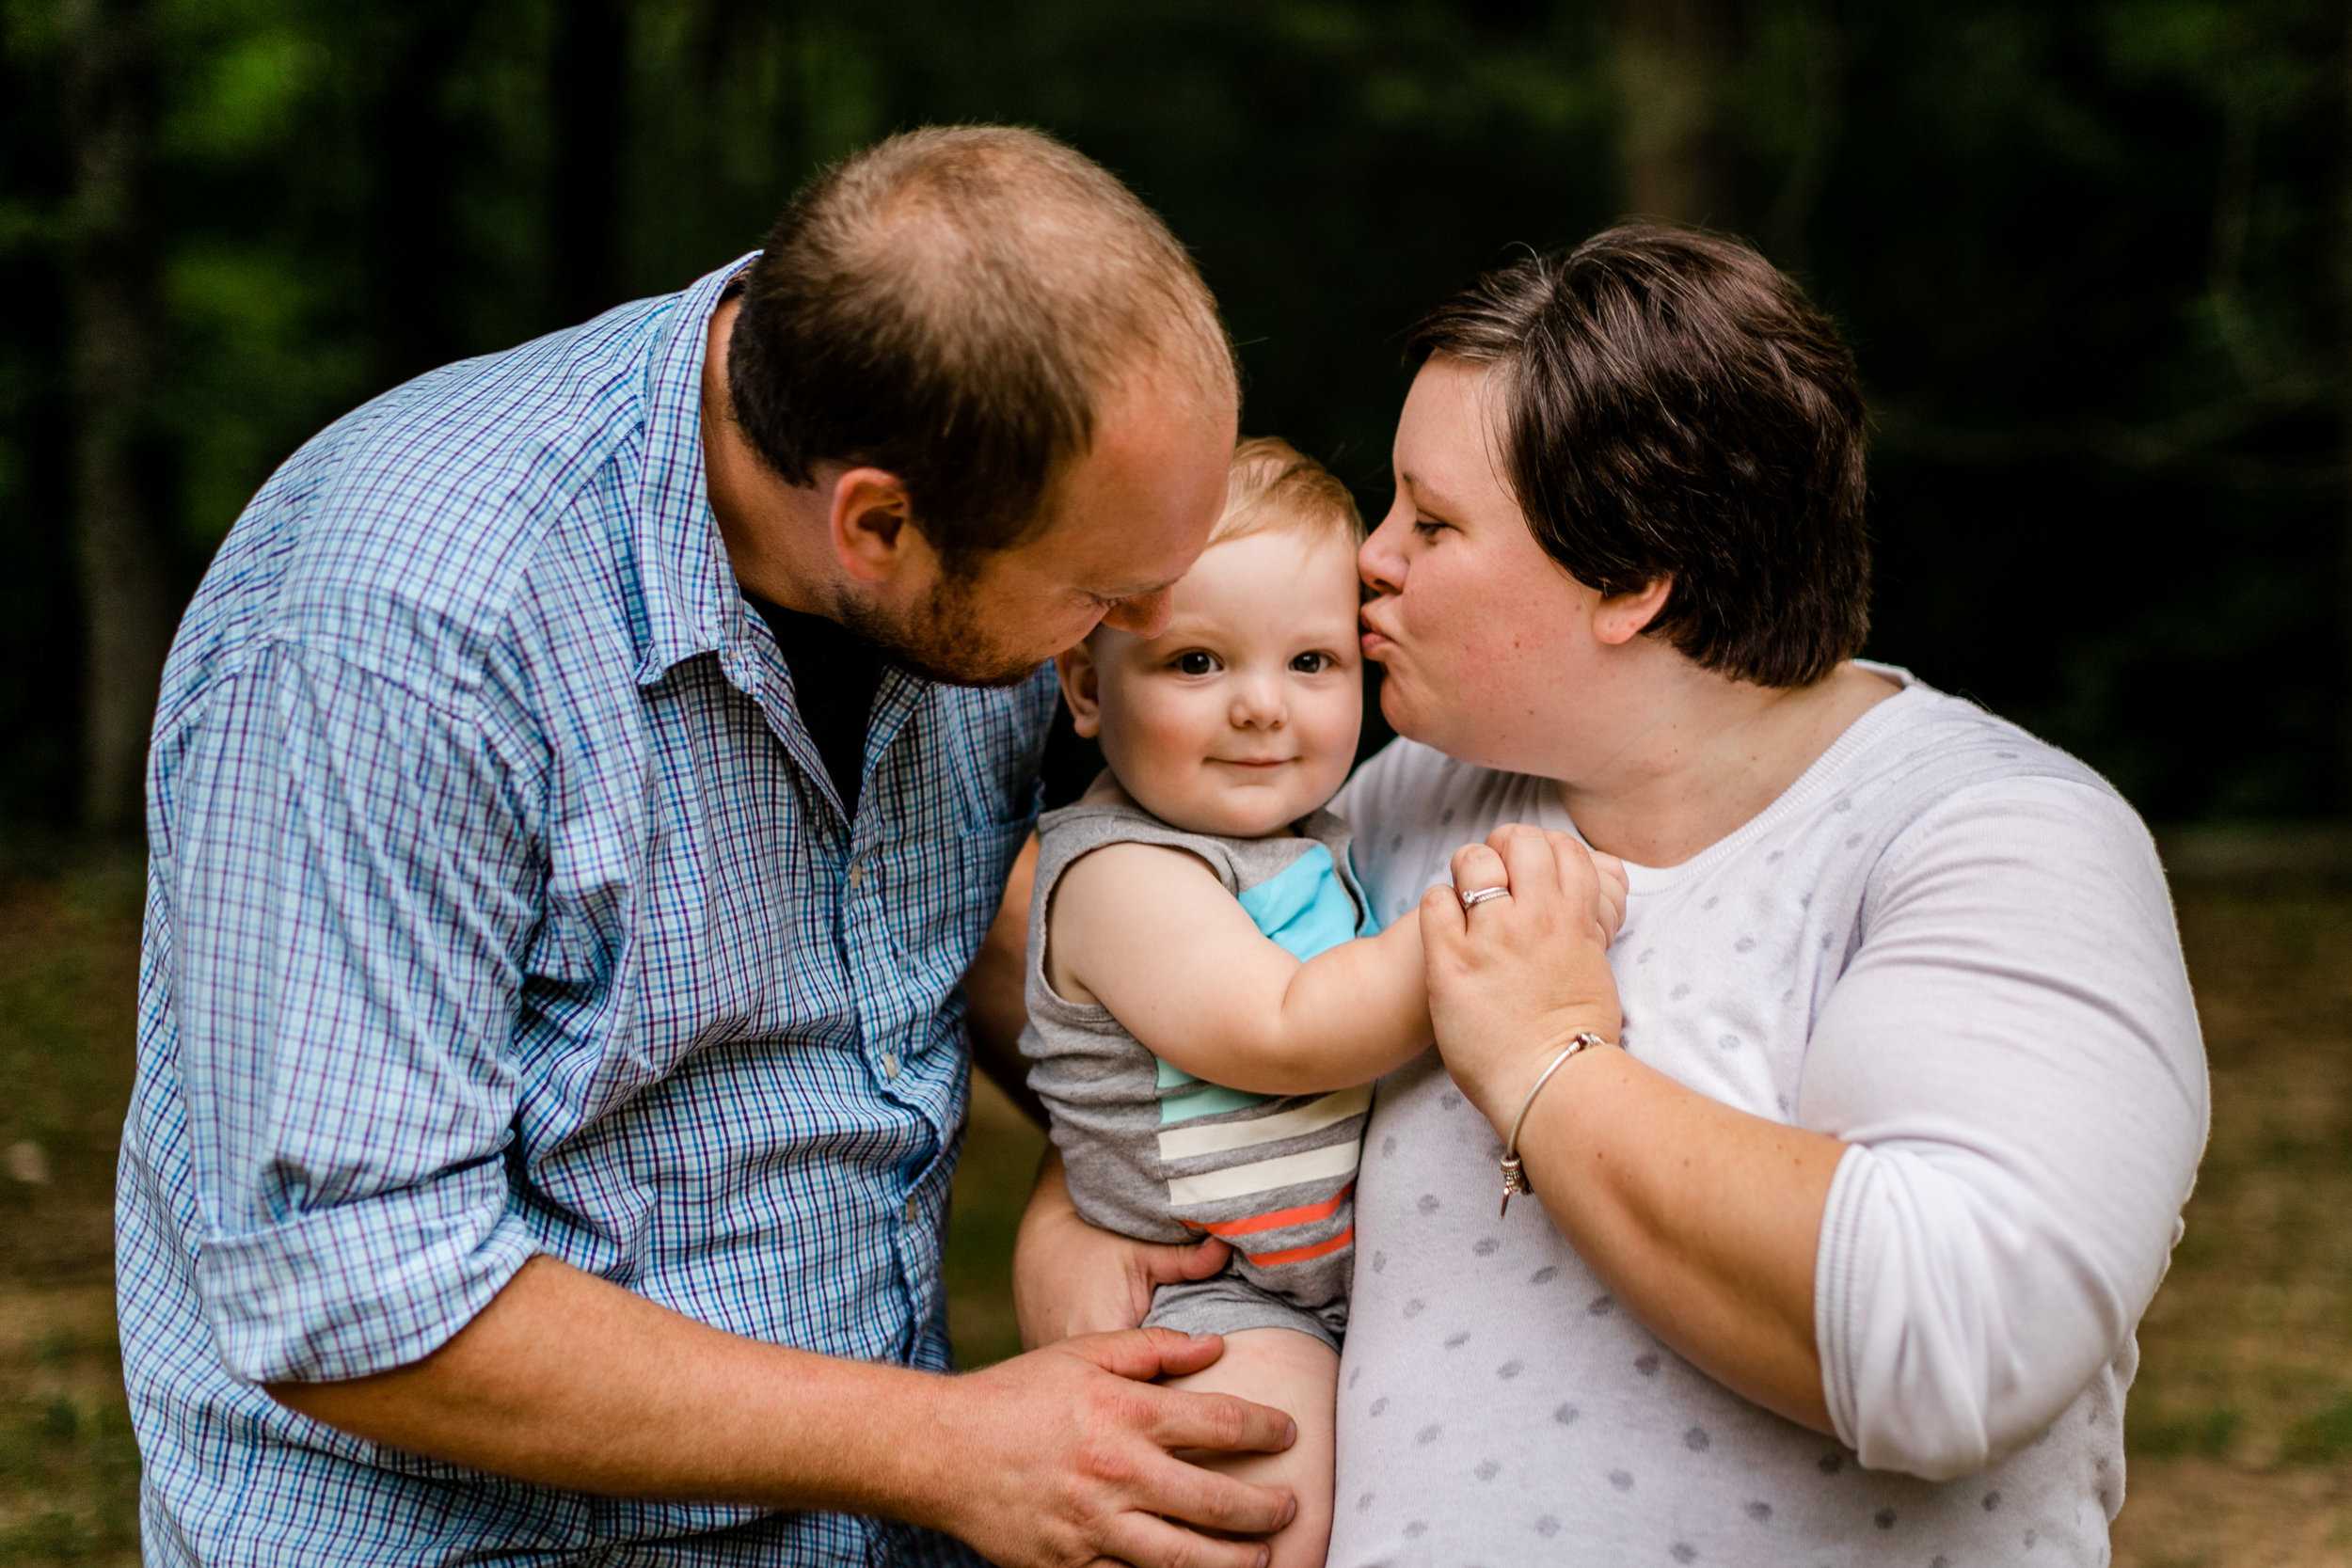 Durham Family Photographer | By G. Lin Photography | Outdoor portraits at Spruce Pine Lodge | Parents kissing son on cheeks